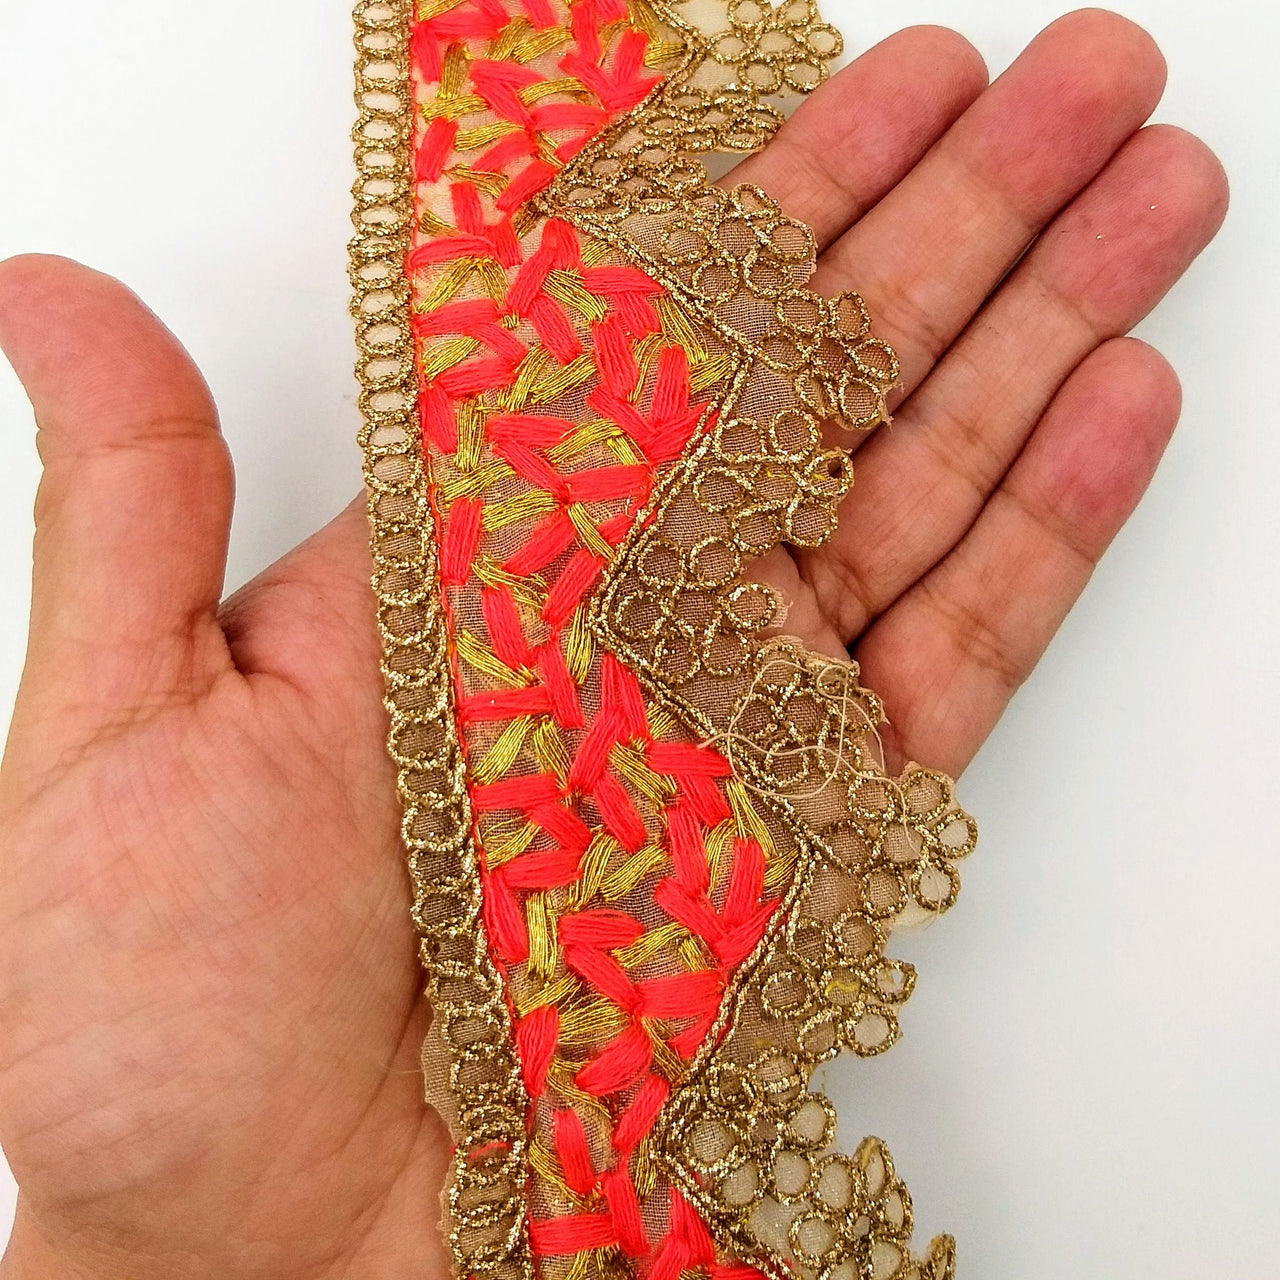 Gold Sheer Tissue Fabric Cutwork Trim with Embroidery in Gold and Orange, Scallop Trim, Fringe Trim